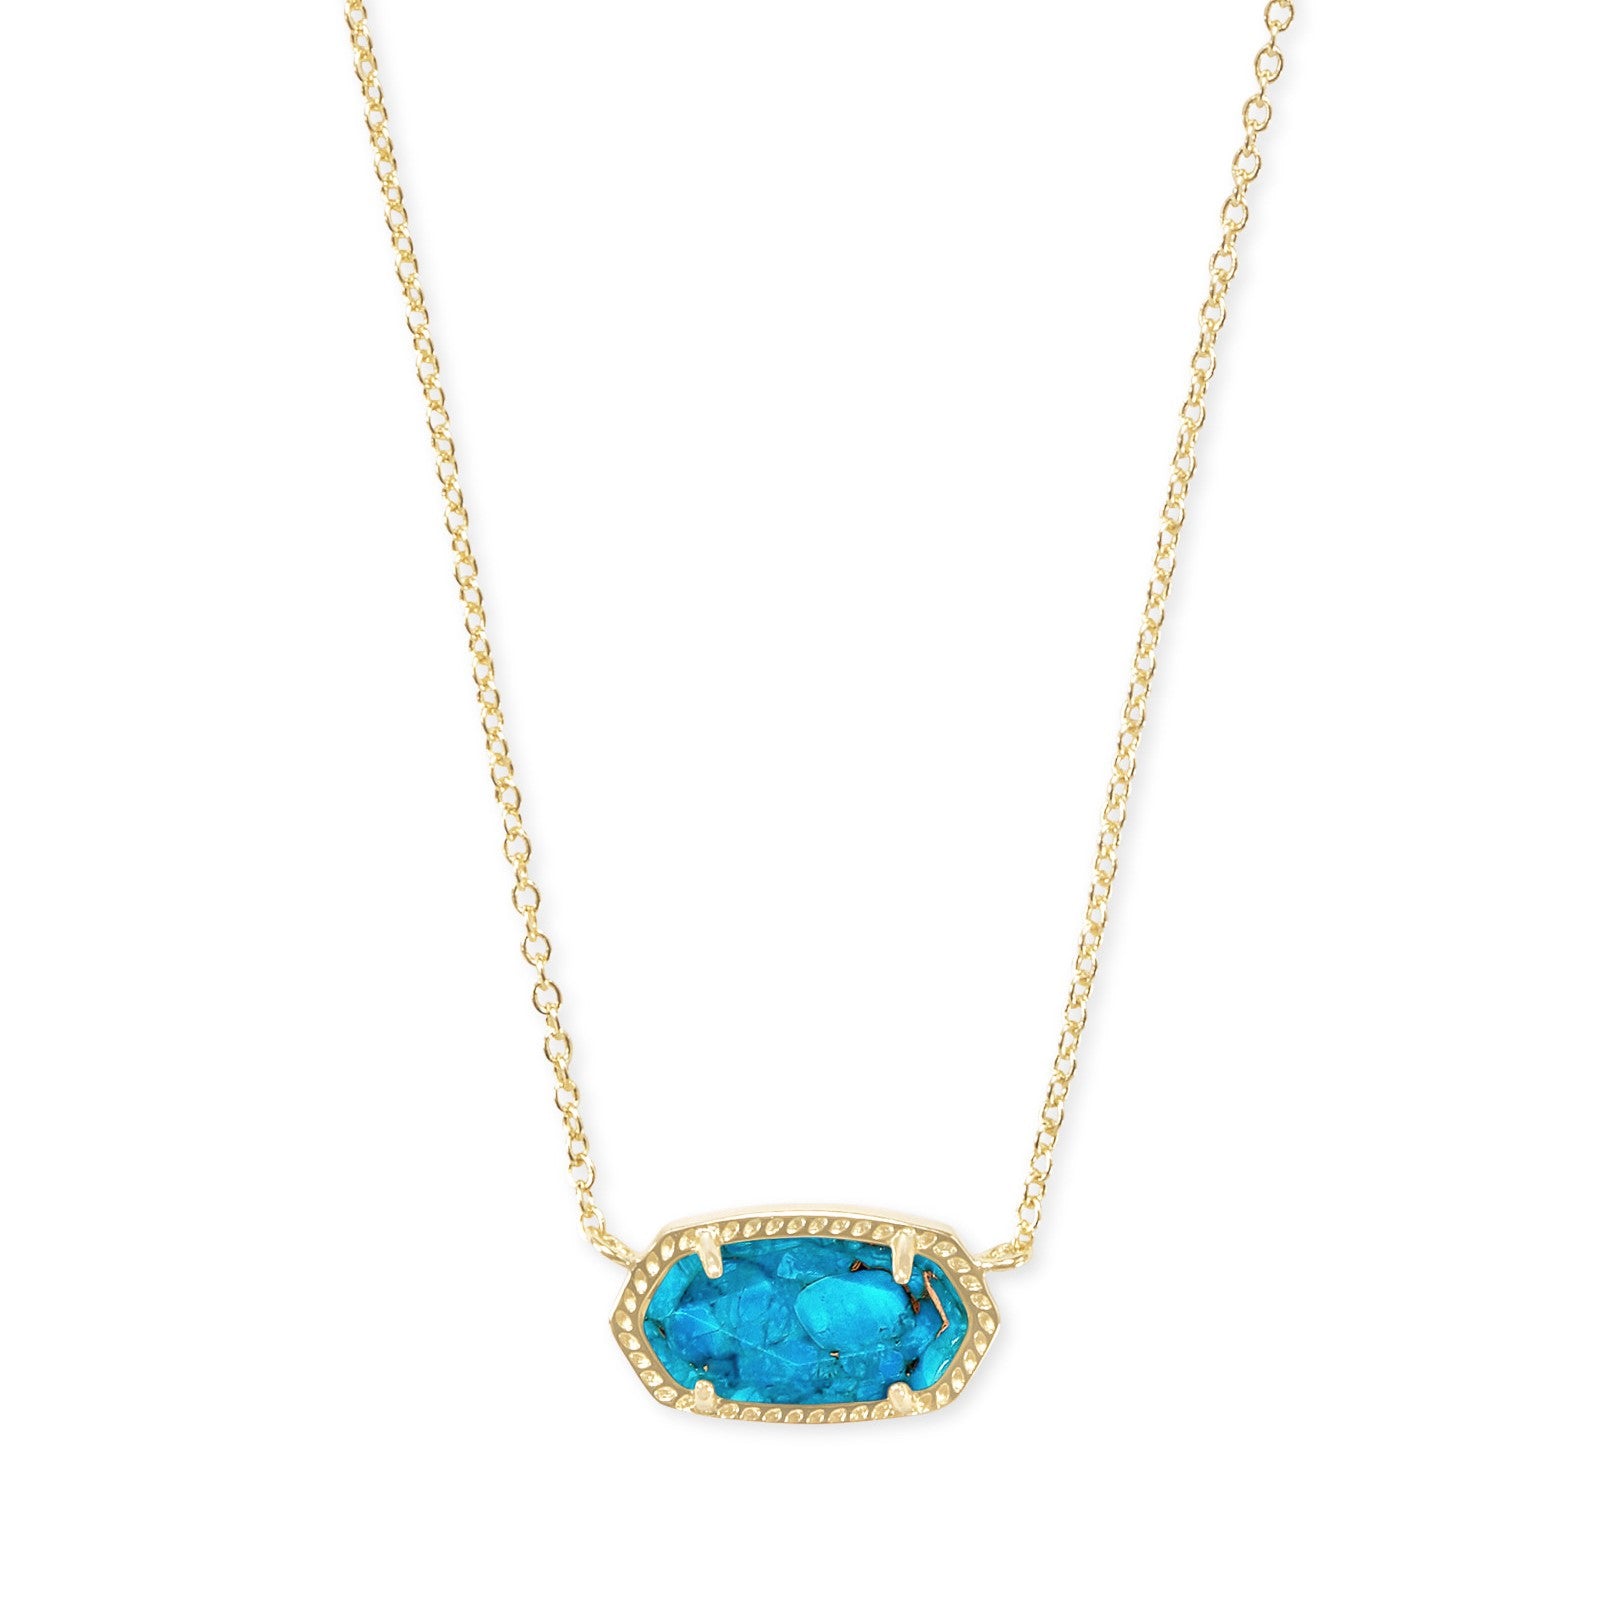 Kendra Scott | Elisa Gold Pendant Necklace in Bronze Veined Turquoise Magnesite - Giddy Up Glamour Boutique